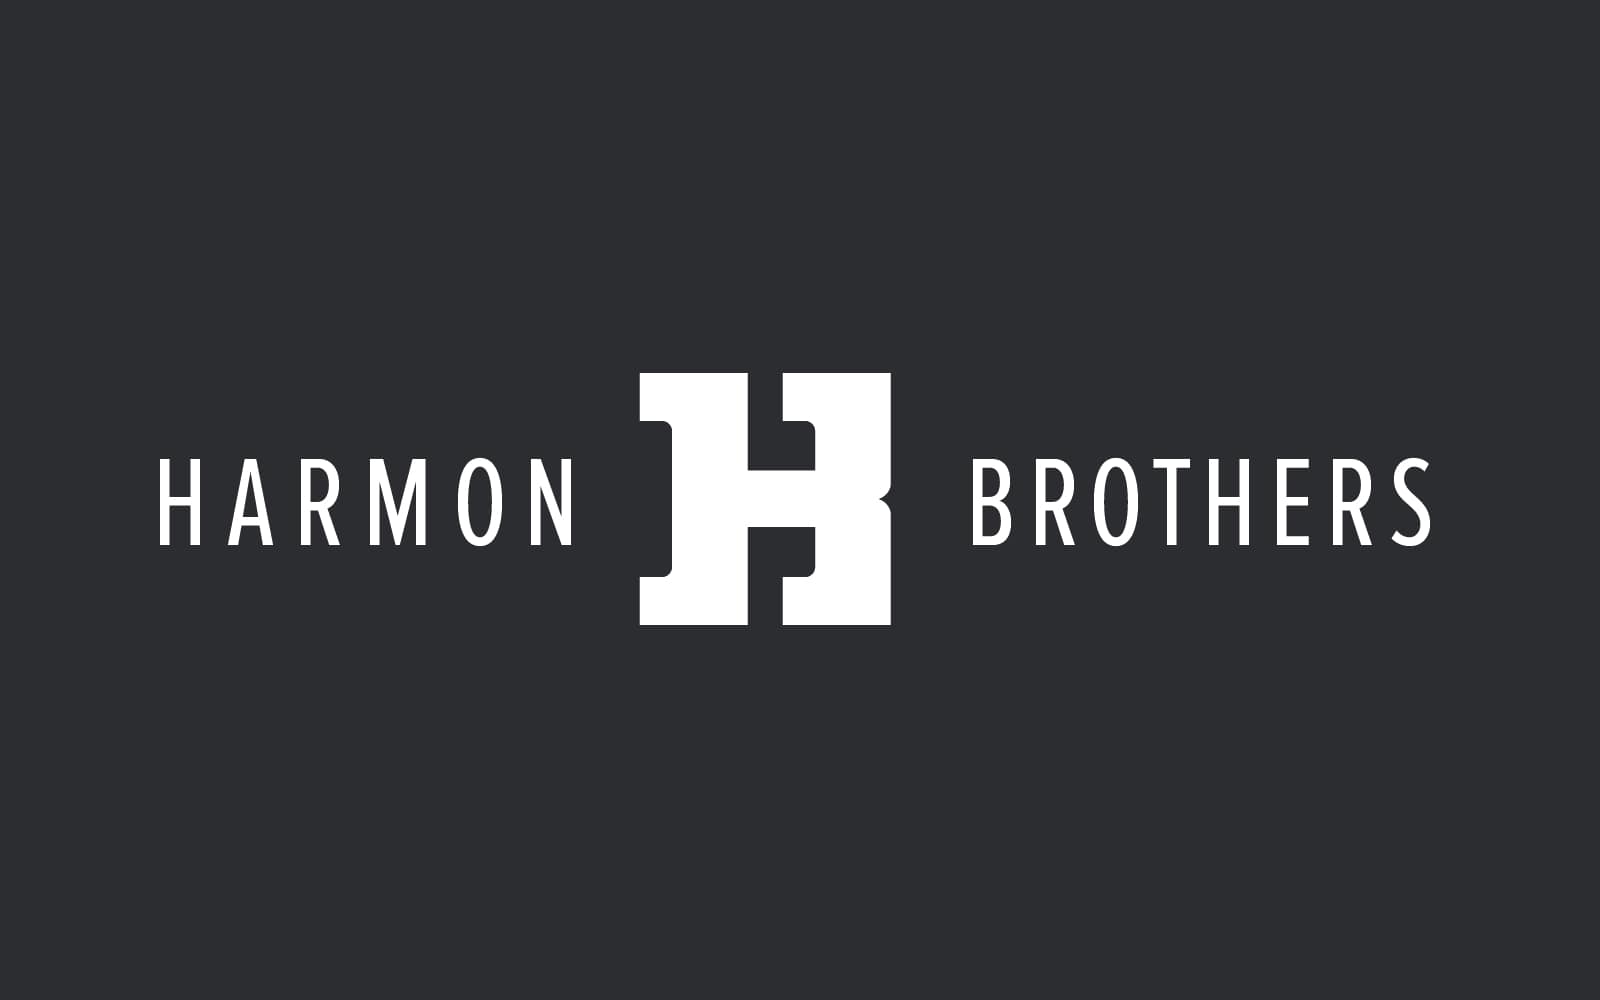 harmon brothers with Timeular improve profitability of ad agency